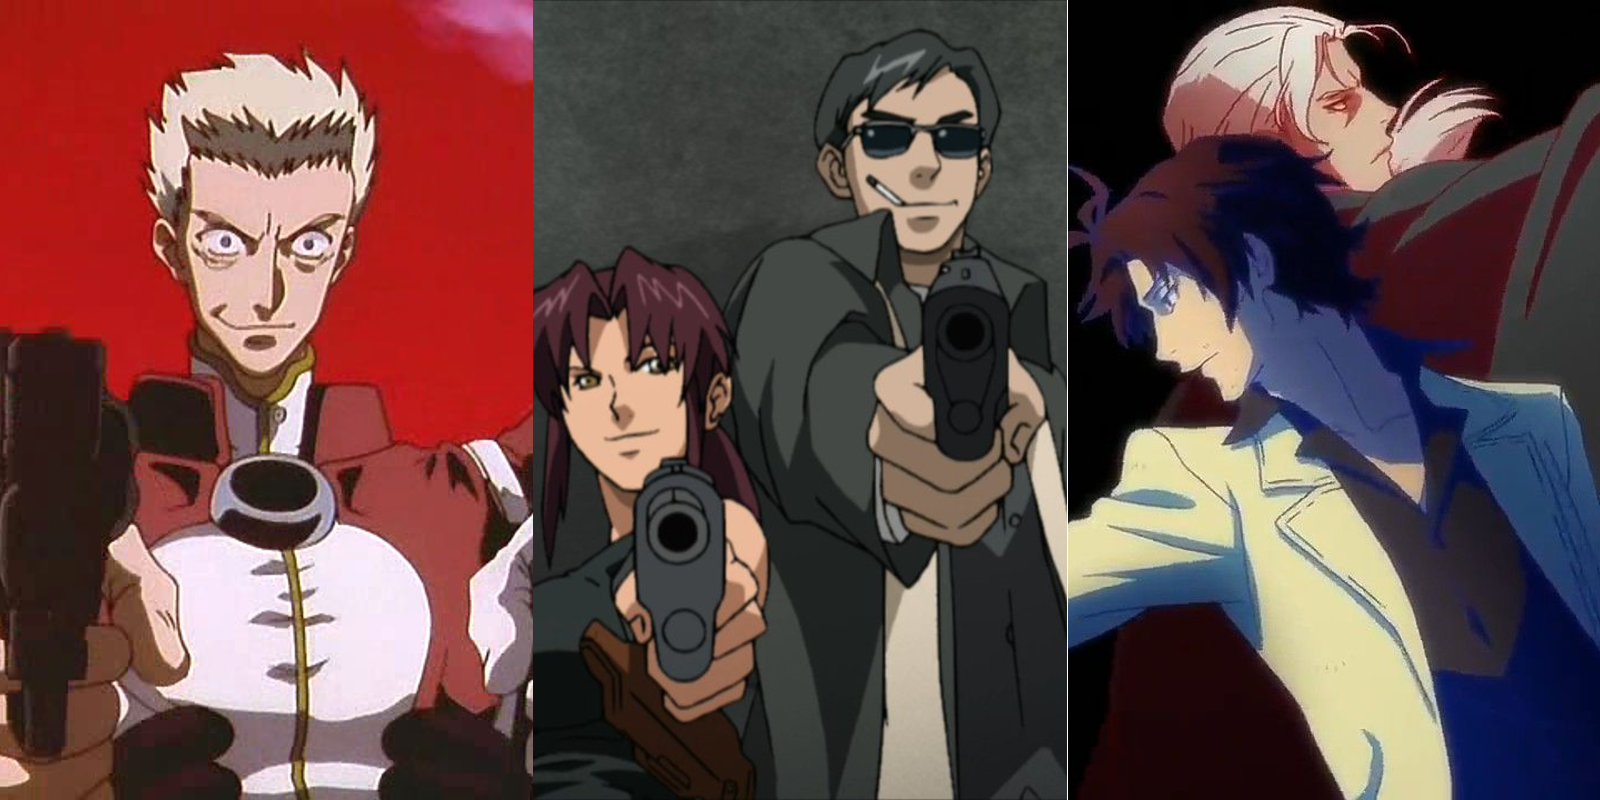 10 Coolest Anime Gunfights, Ranked